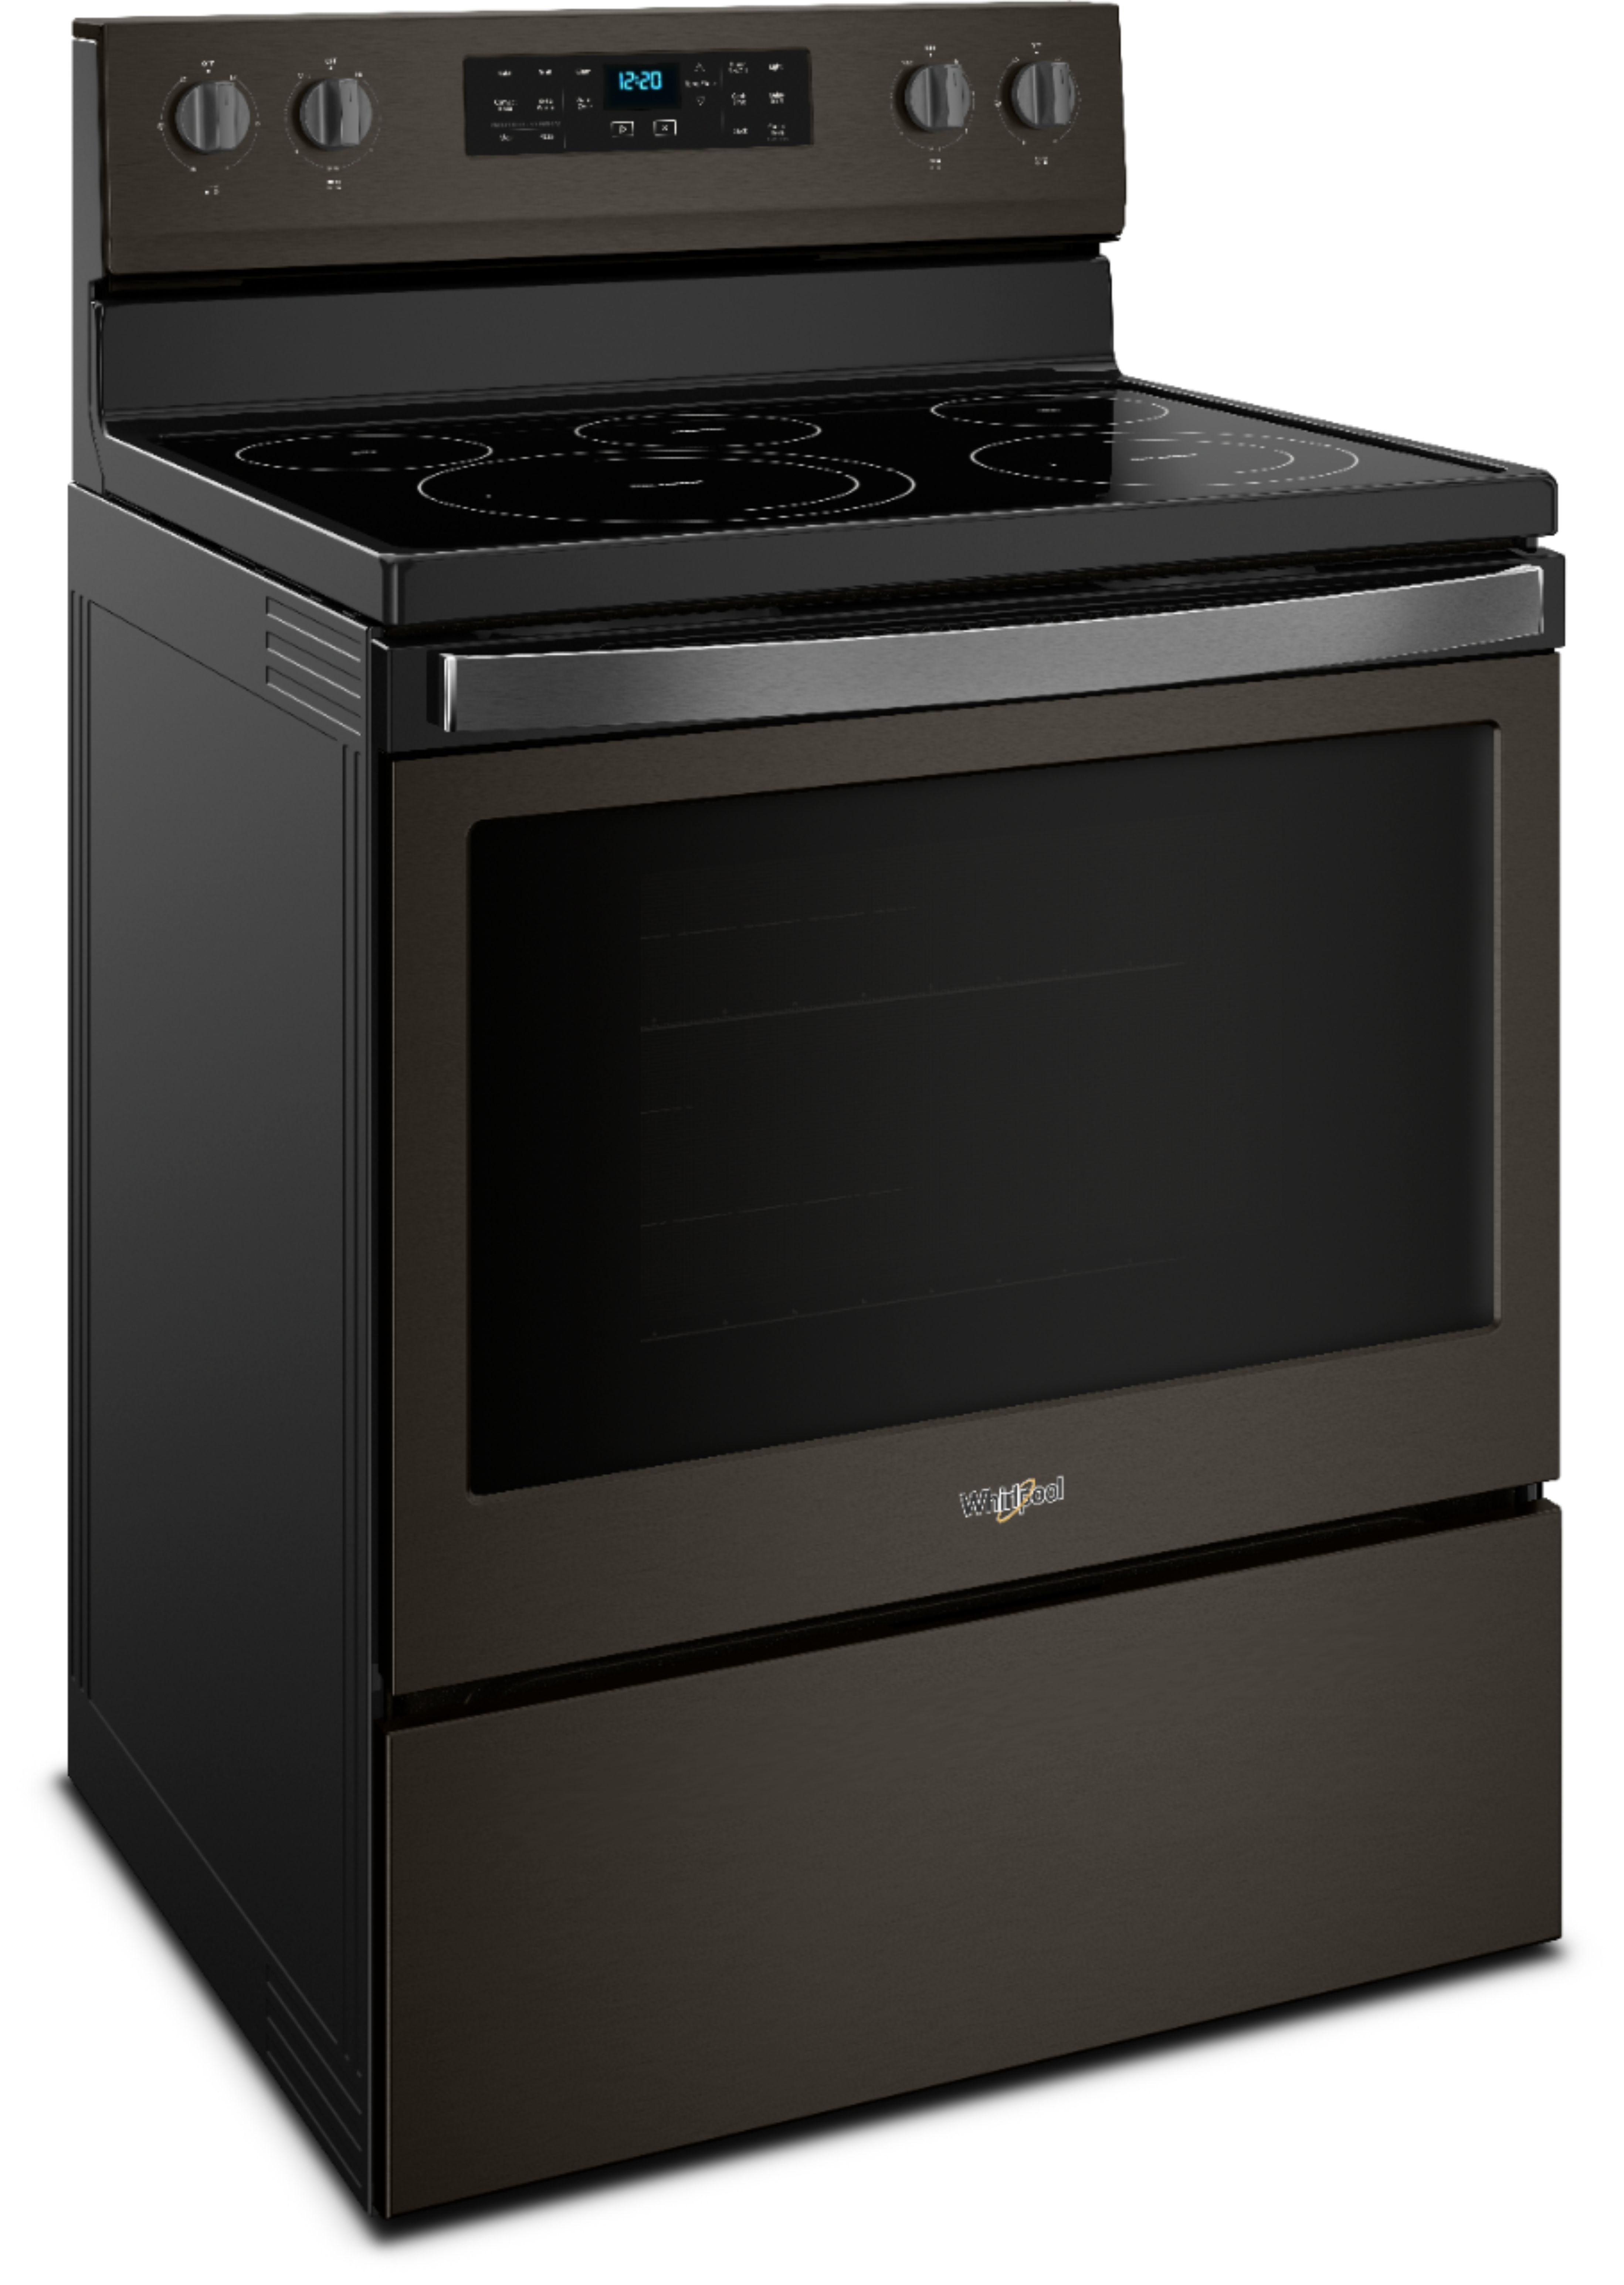 Angle View: Whirlpool - 5.3 Cu. Ft. Freestanding Electric Convection Range with Self-High Heat Cleaning Method - Black stainless steel